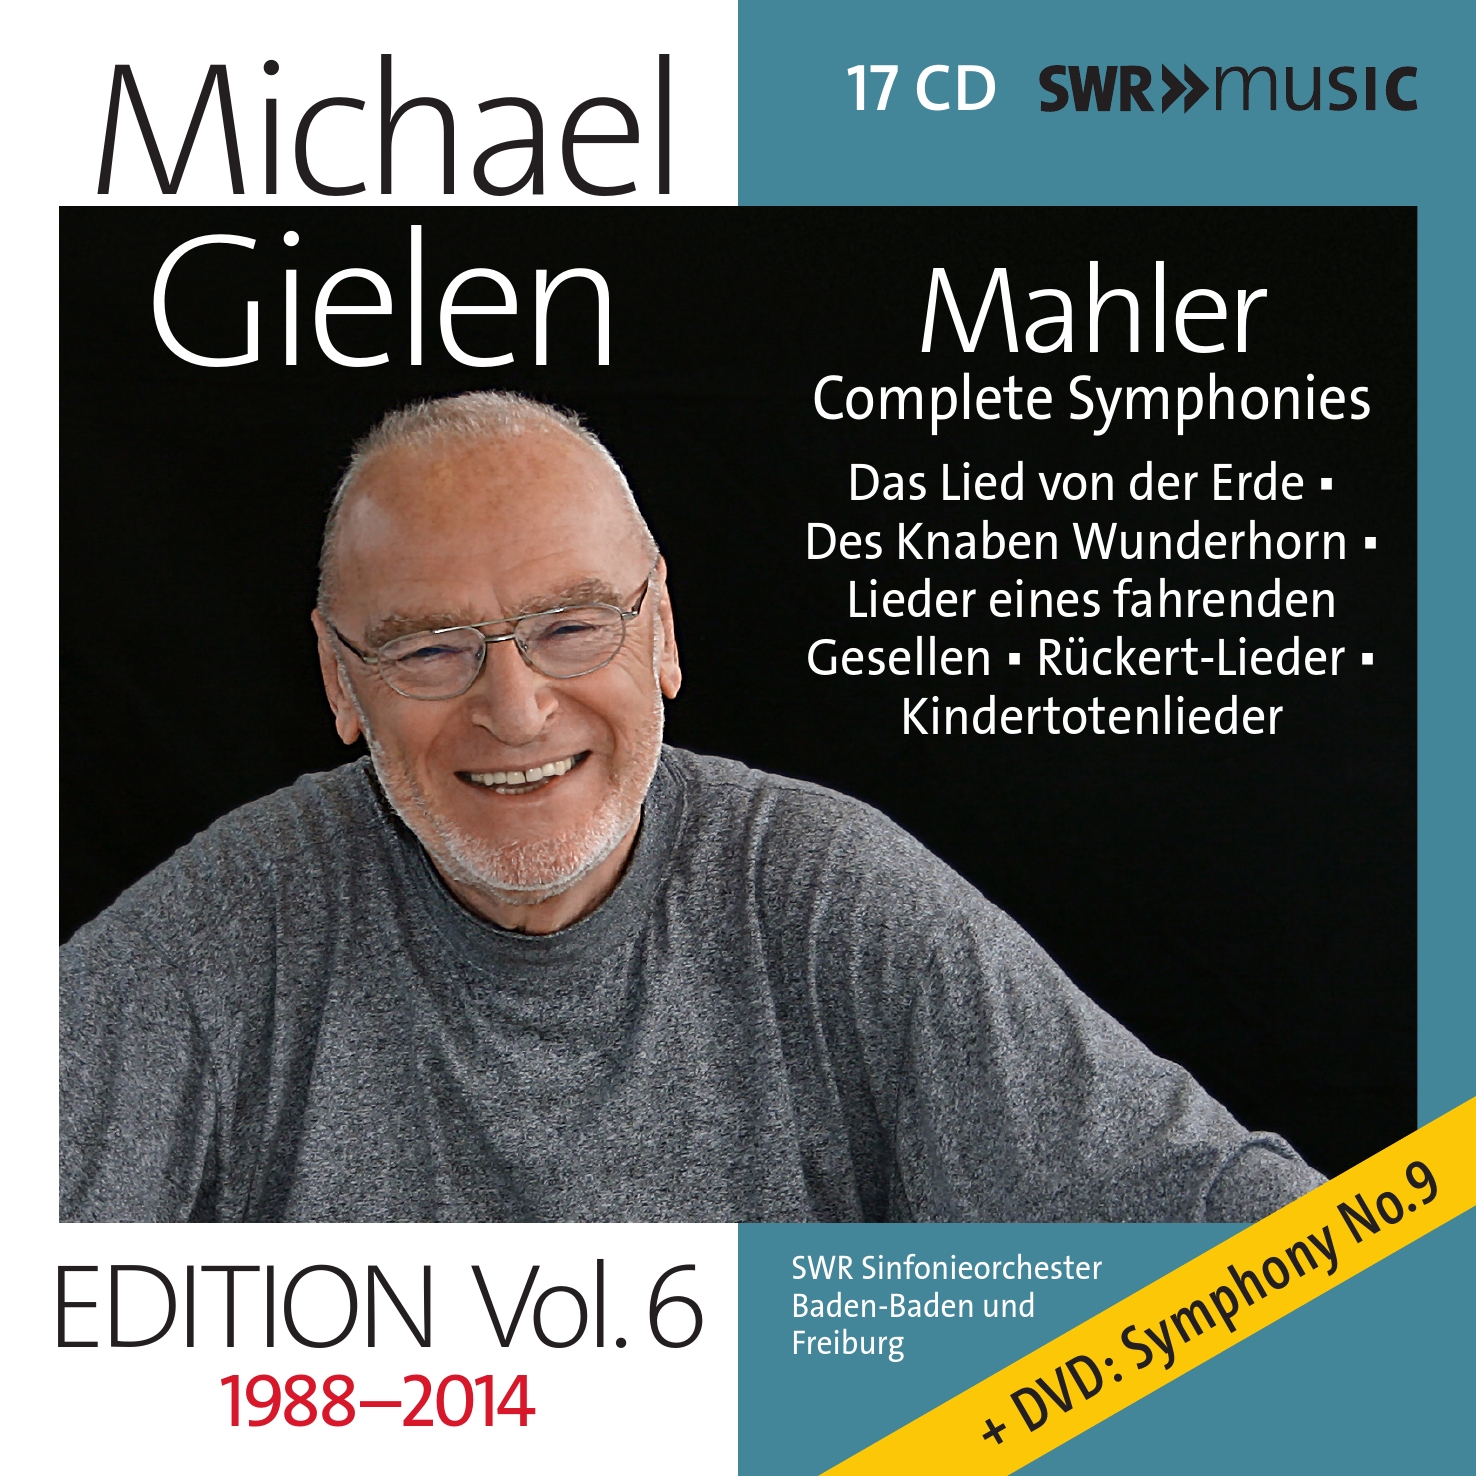 Michael Gielen Ed - Vol 6 Mahler Symphonies and. Song Cycles Recorded 1988-2014 cd13